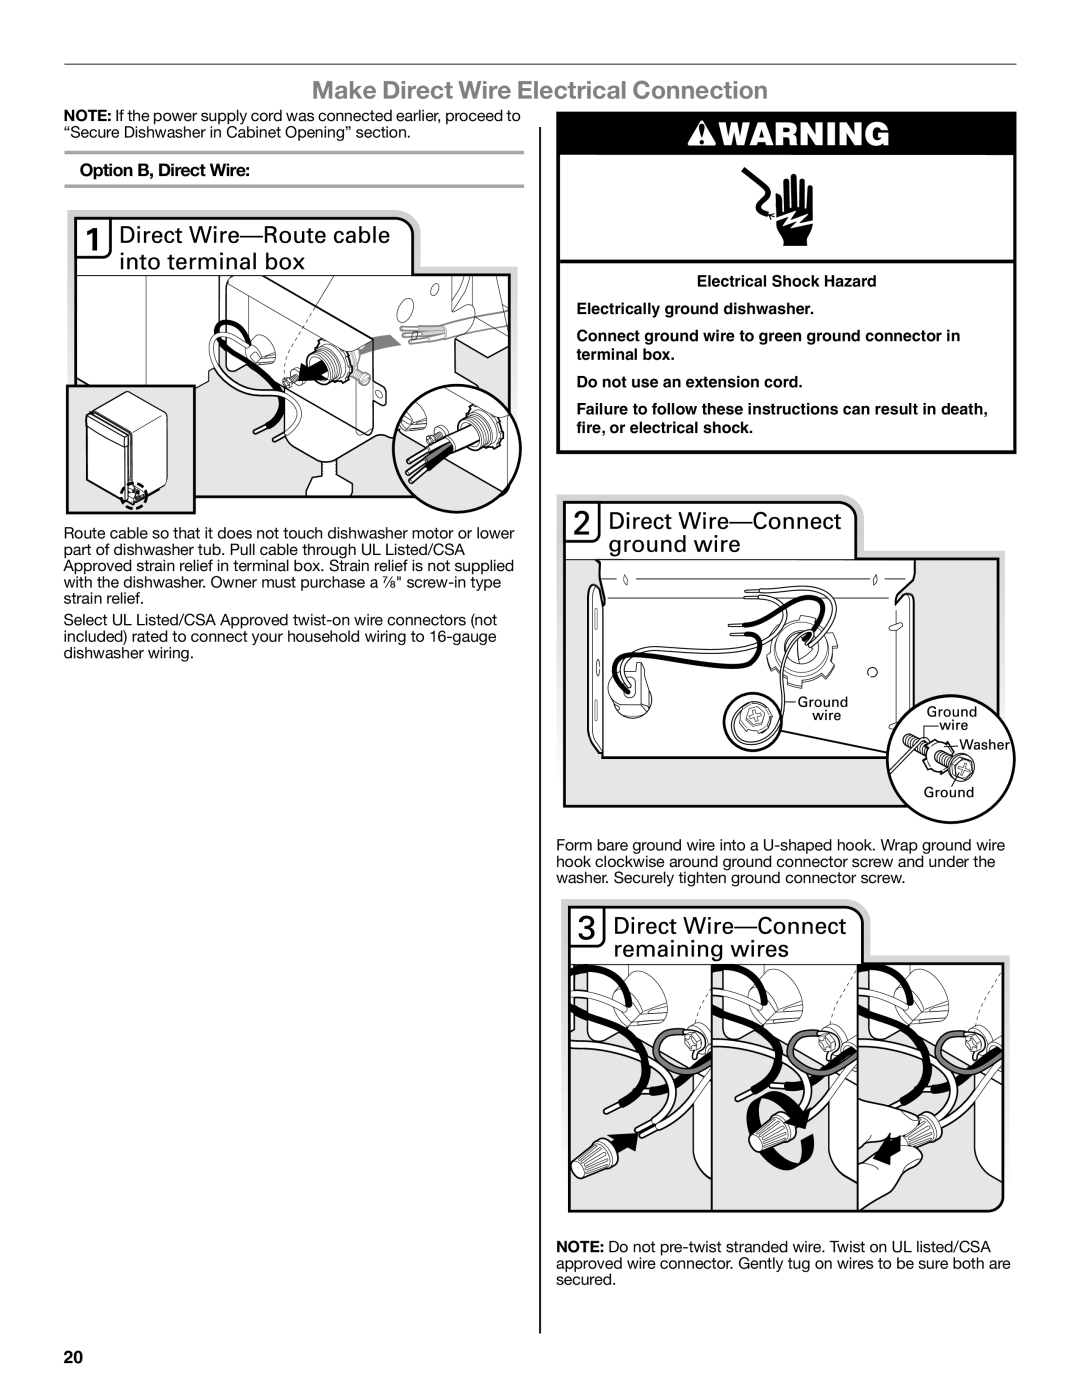 Maytag W10532762A installation instructions Make Direct Wire Electrical Connection, Option B, Direct Wire 